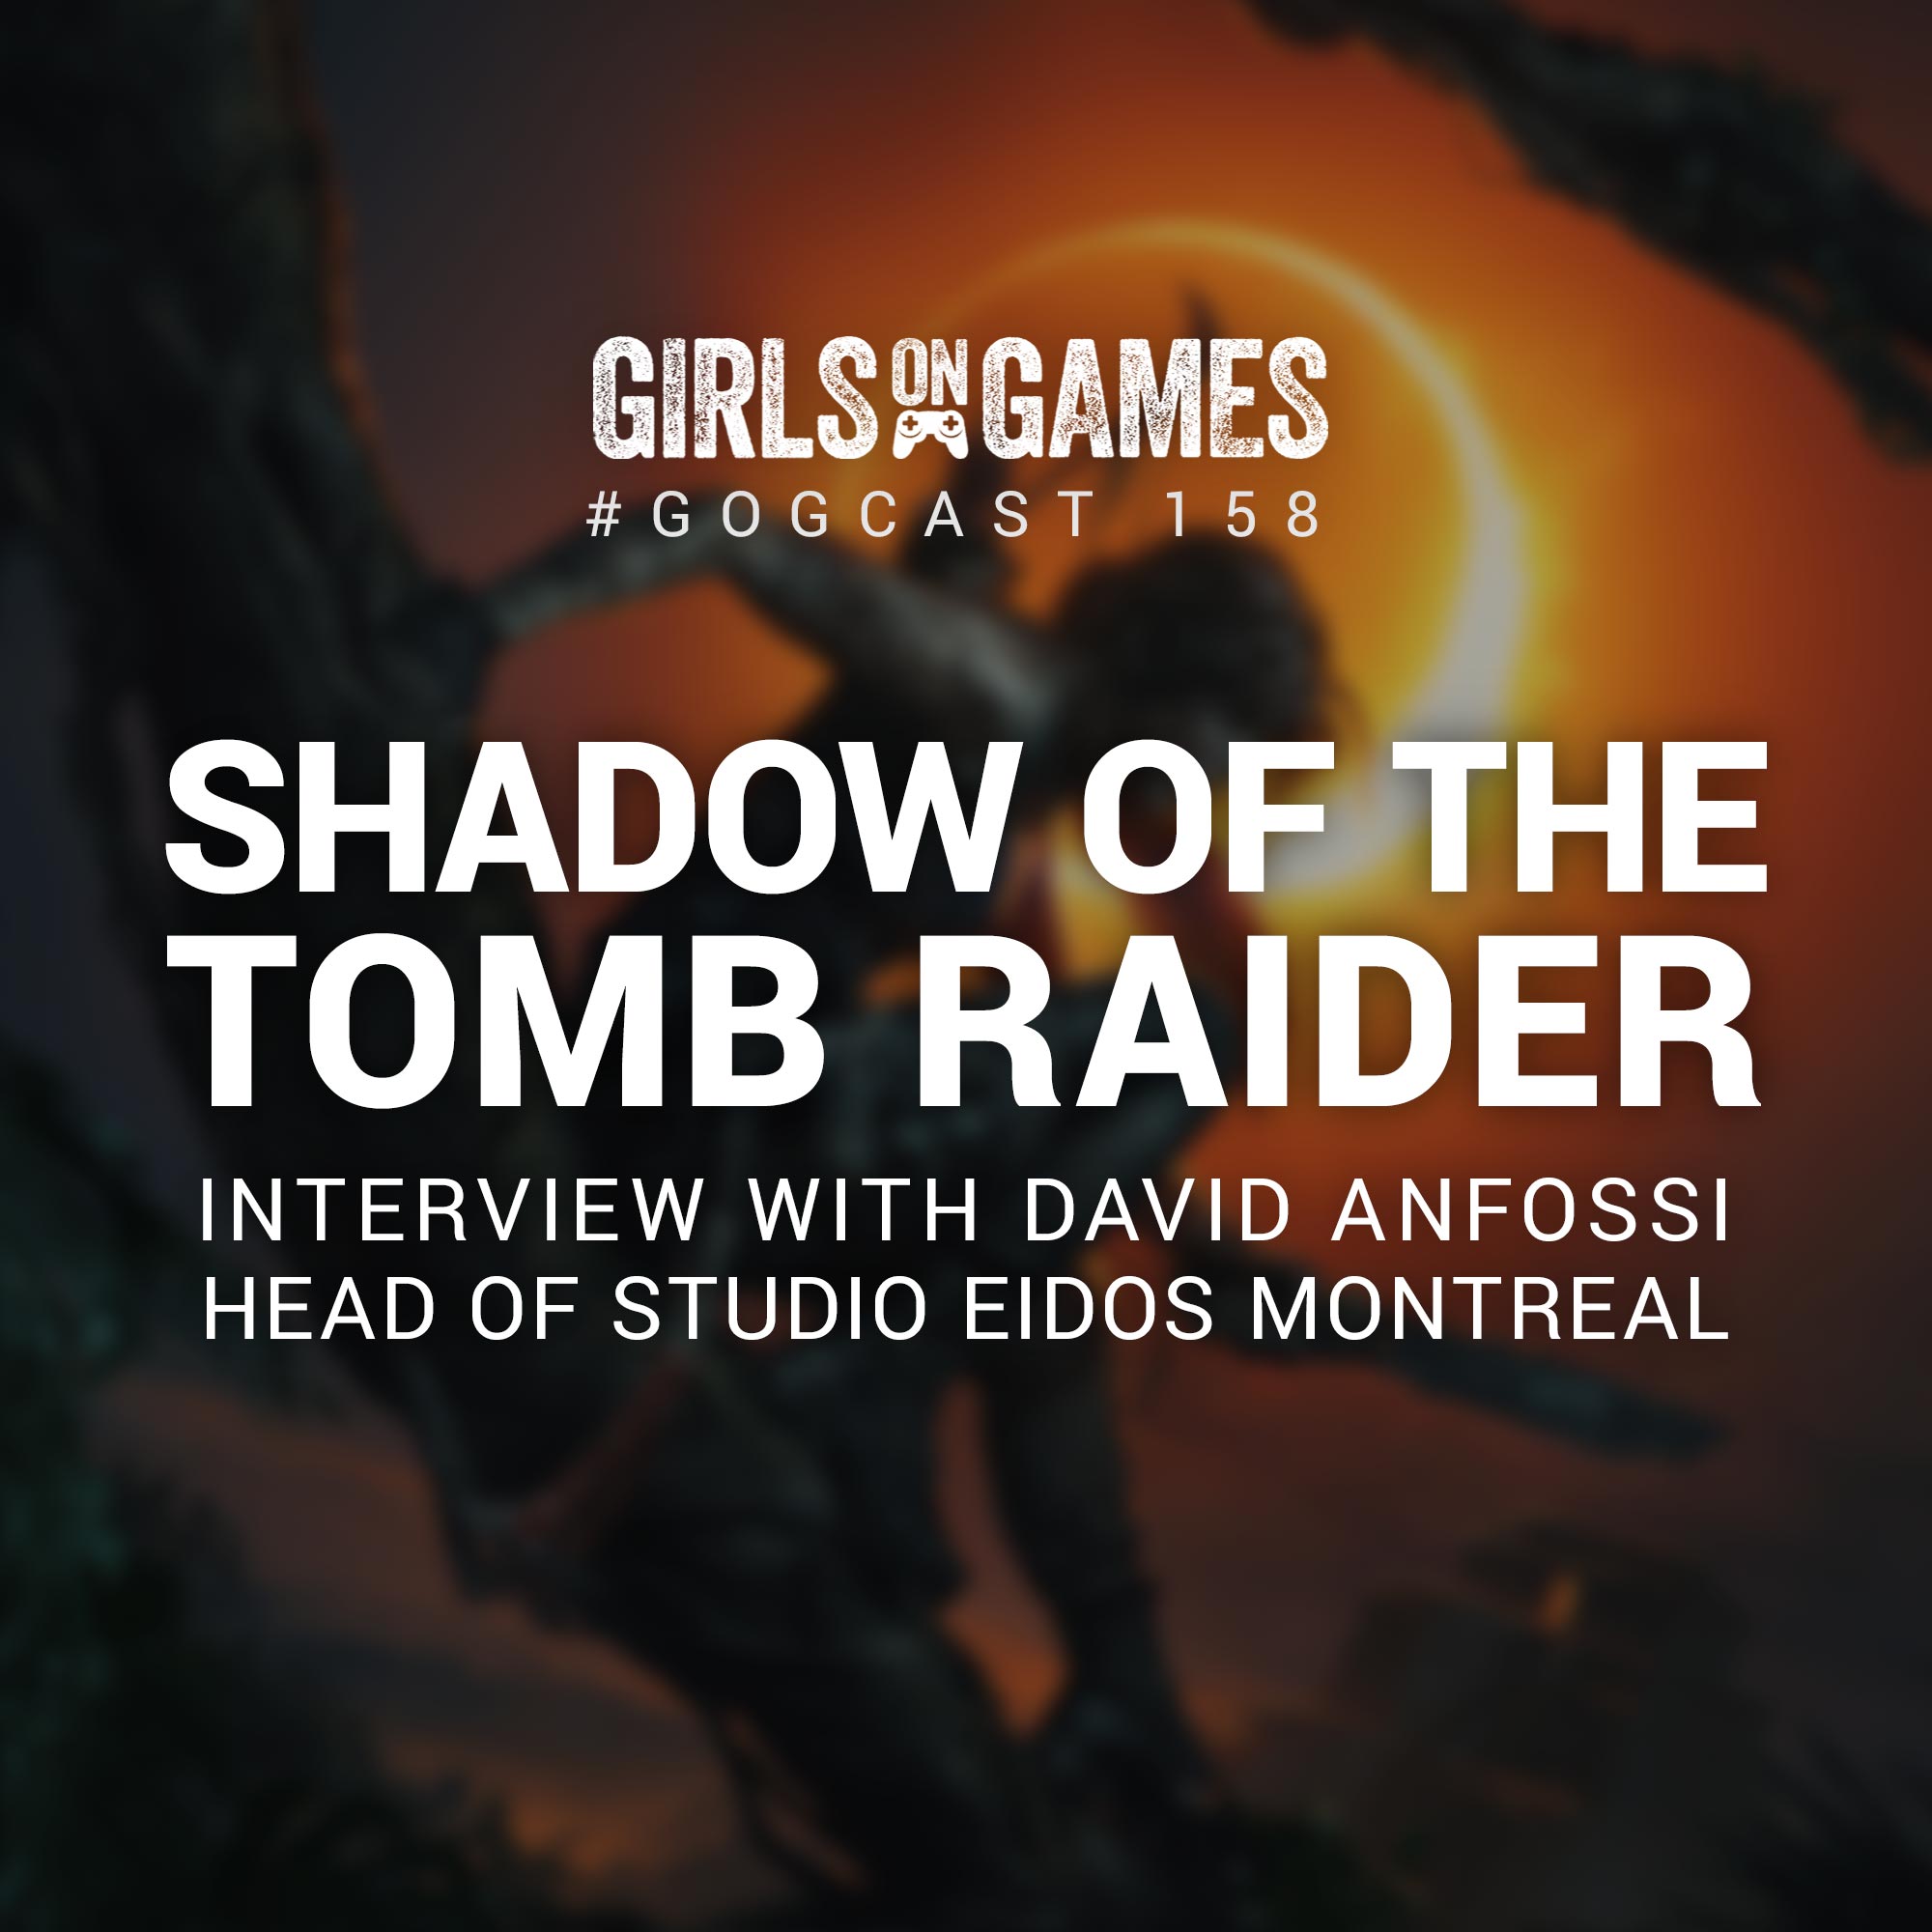 GoGCast 158: Shadow of the Tomb Raider - Interview with David Anfossi